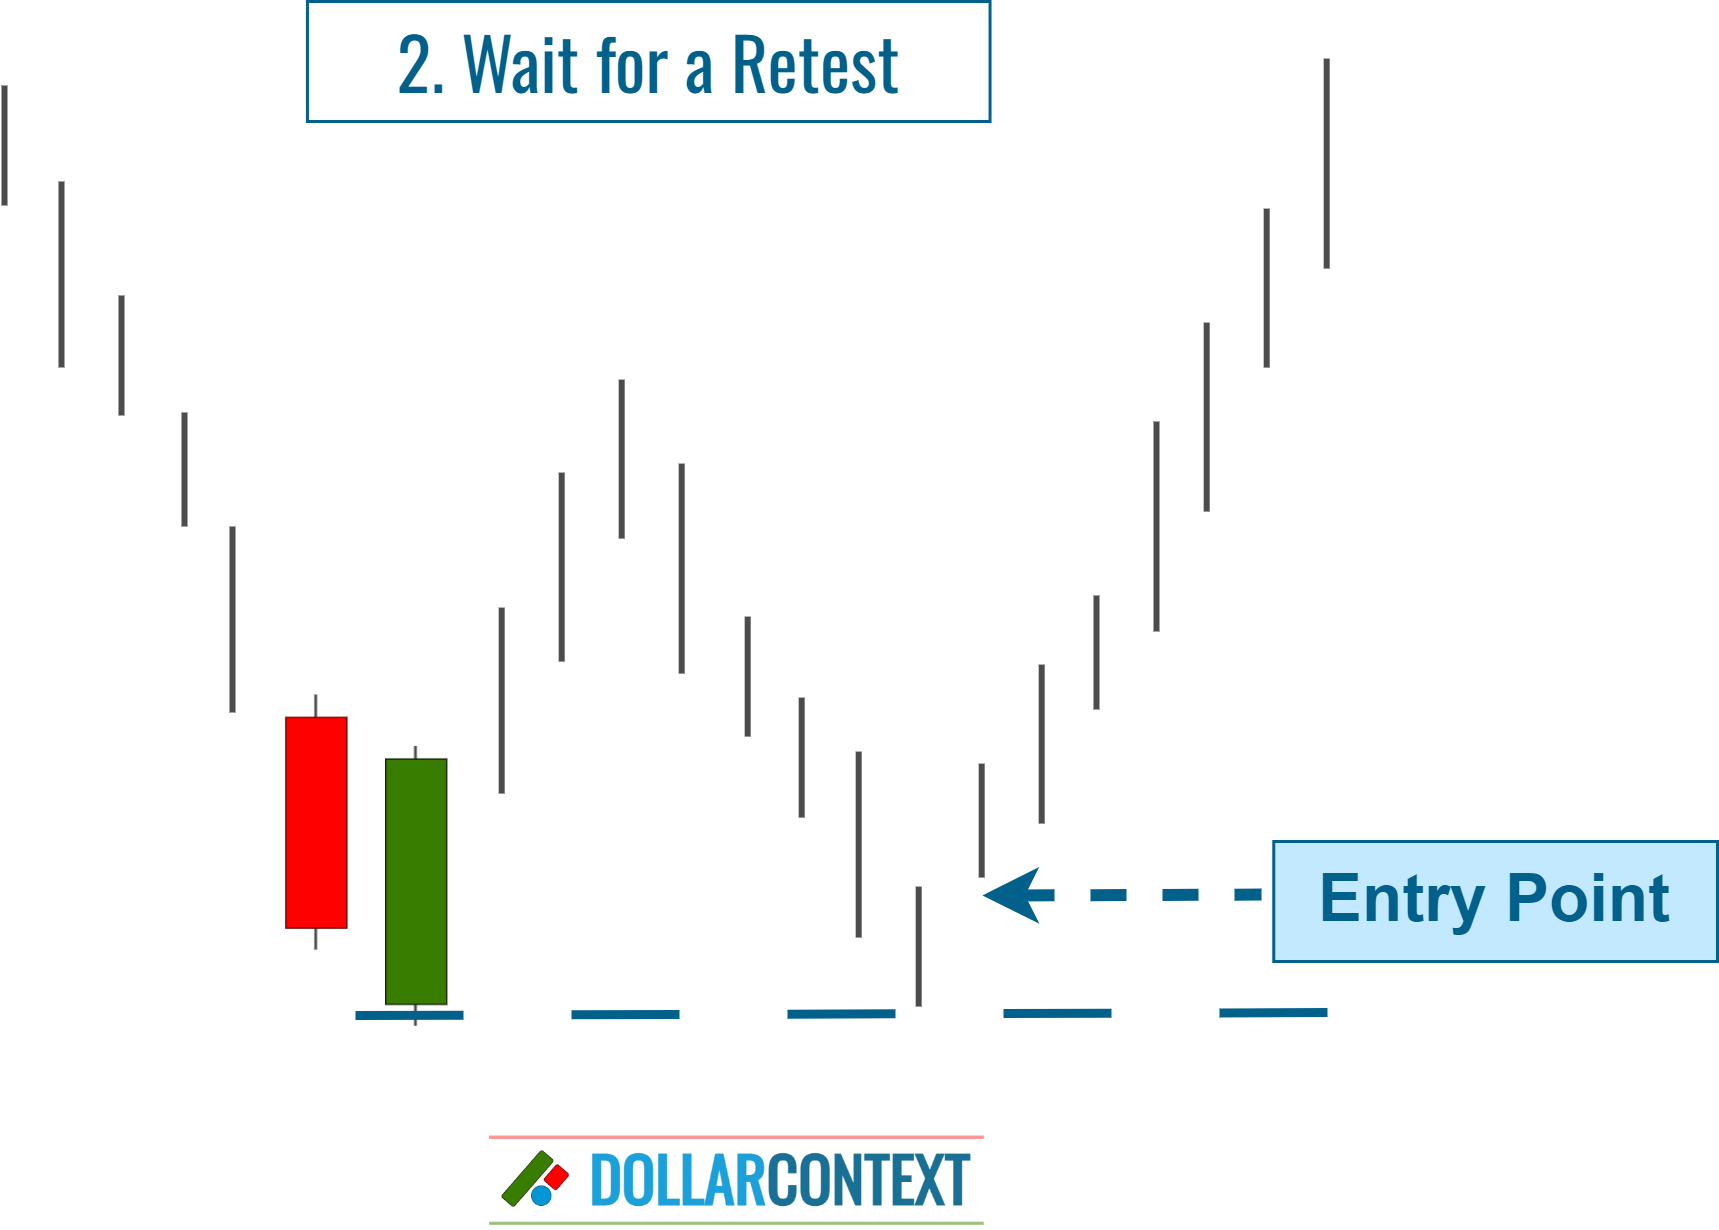 Entry After a Pullback